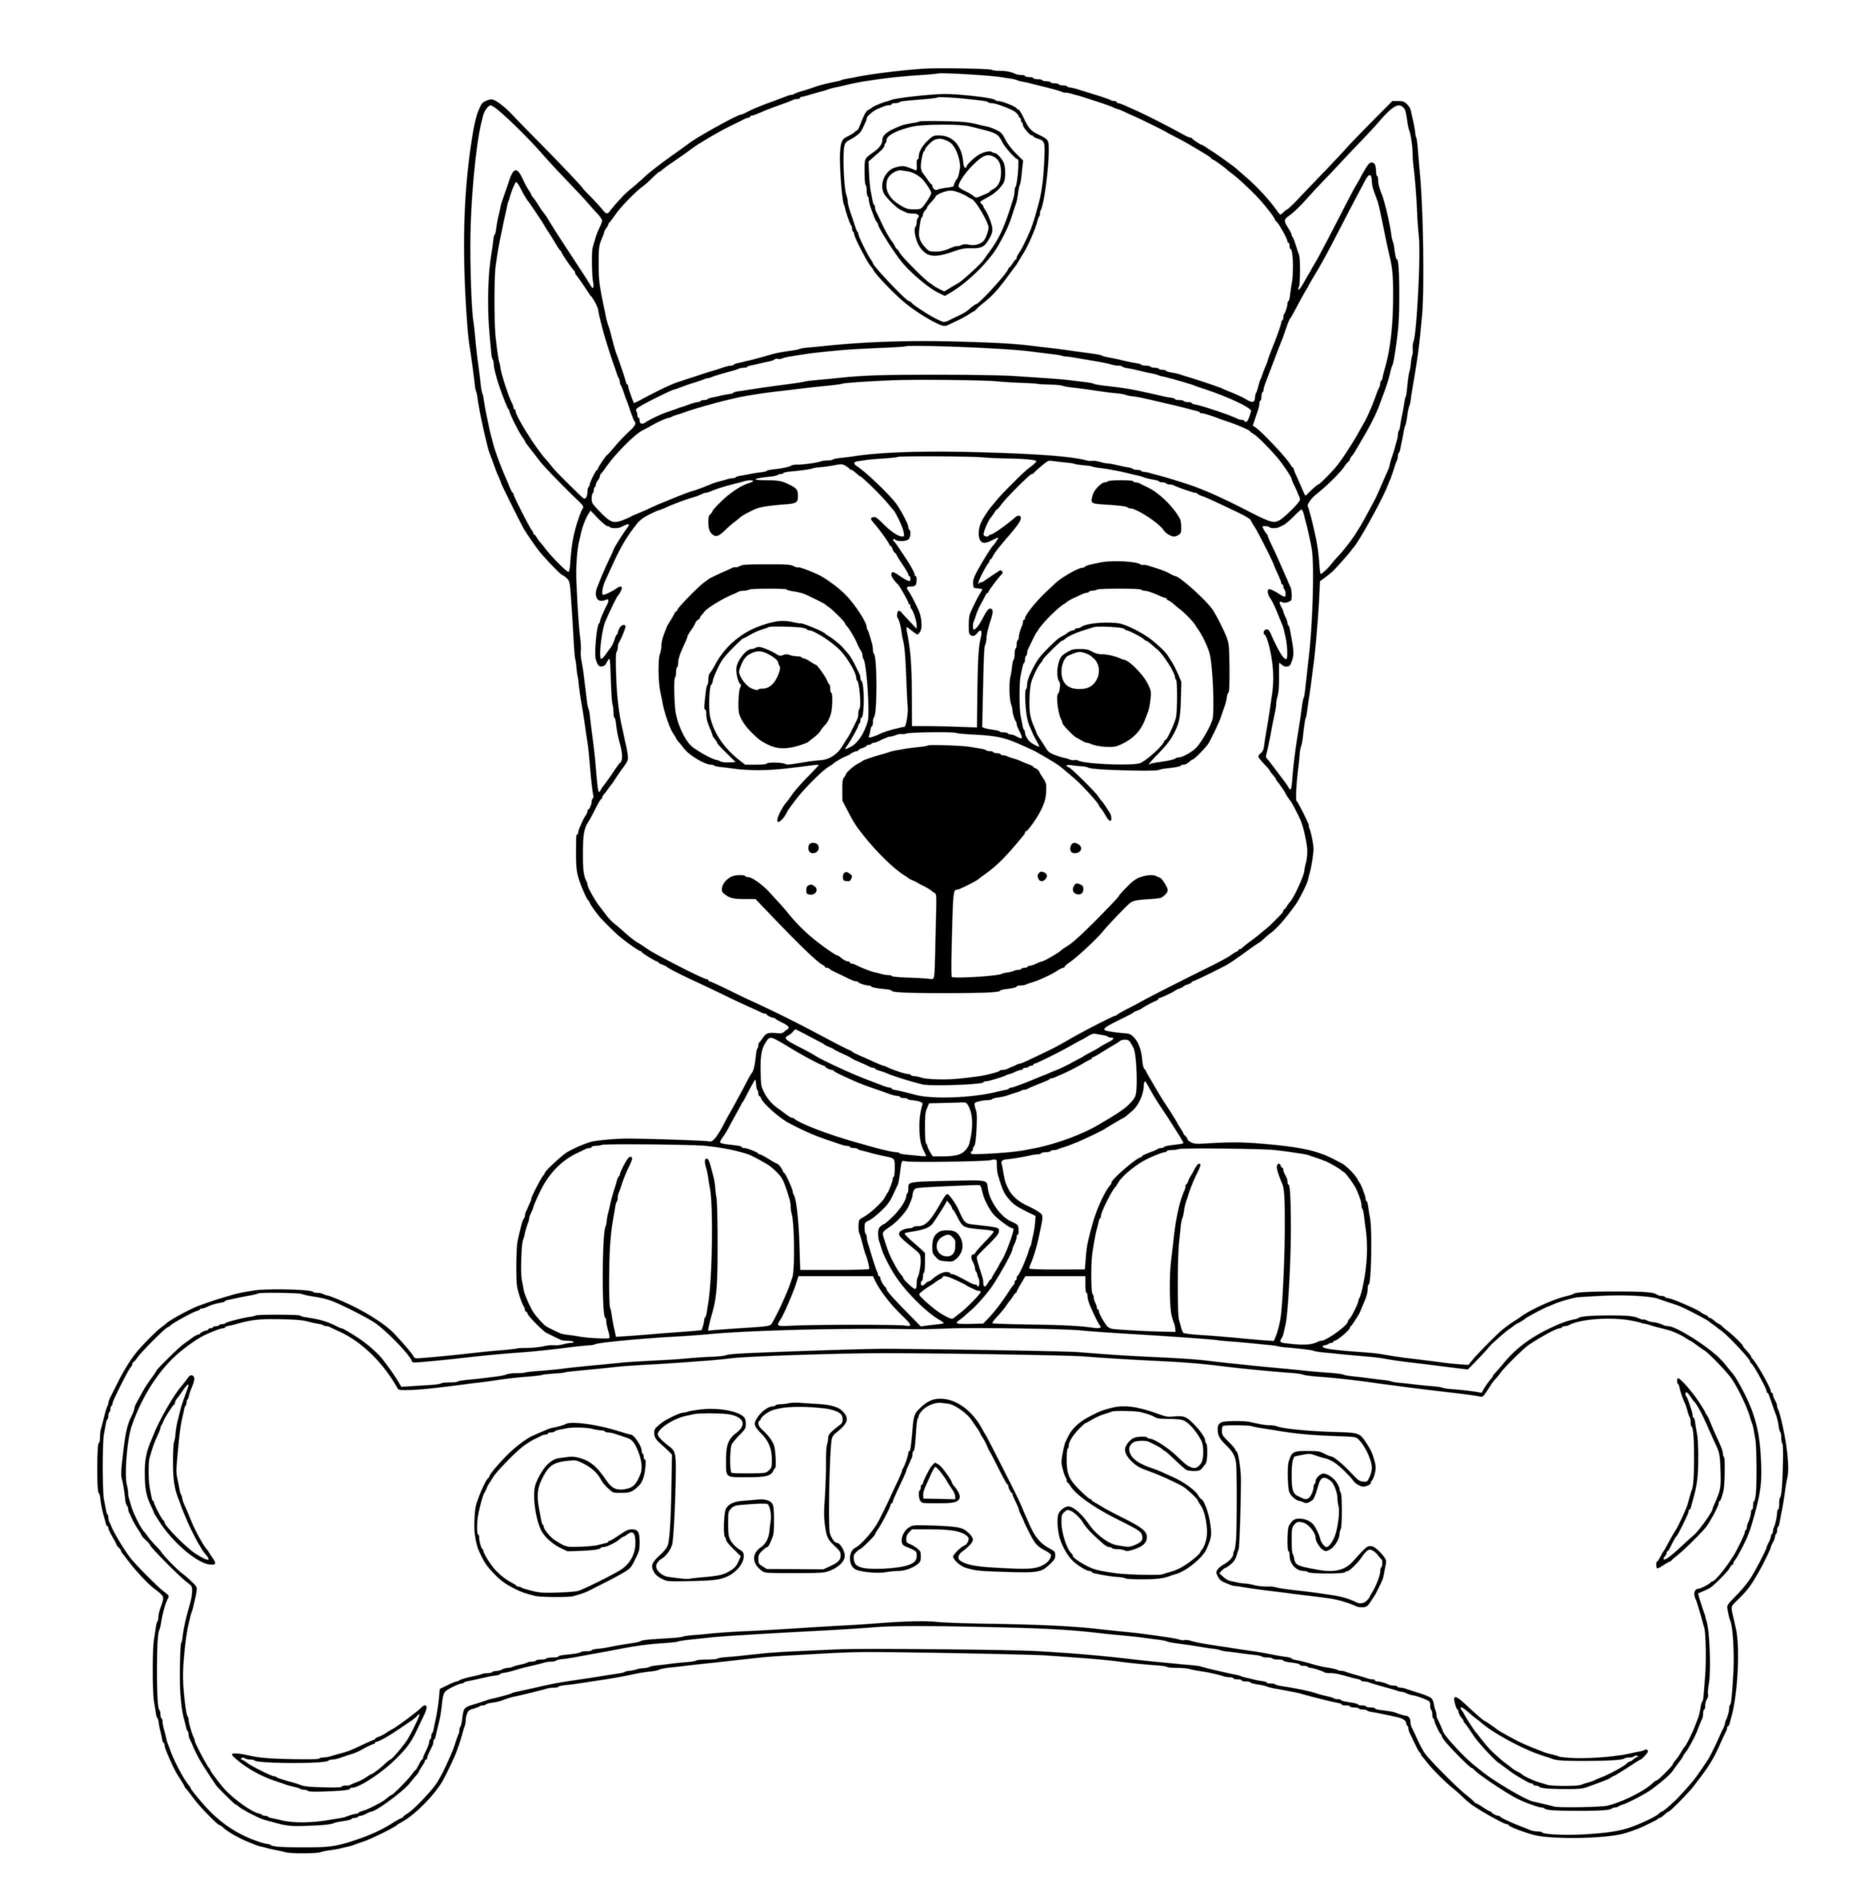 Chase Traffic Cop Pup Coloring Page